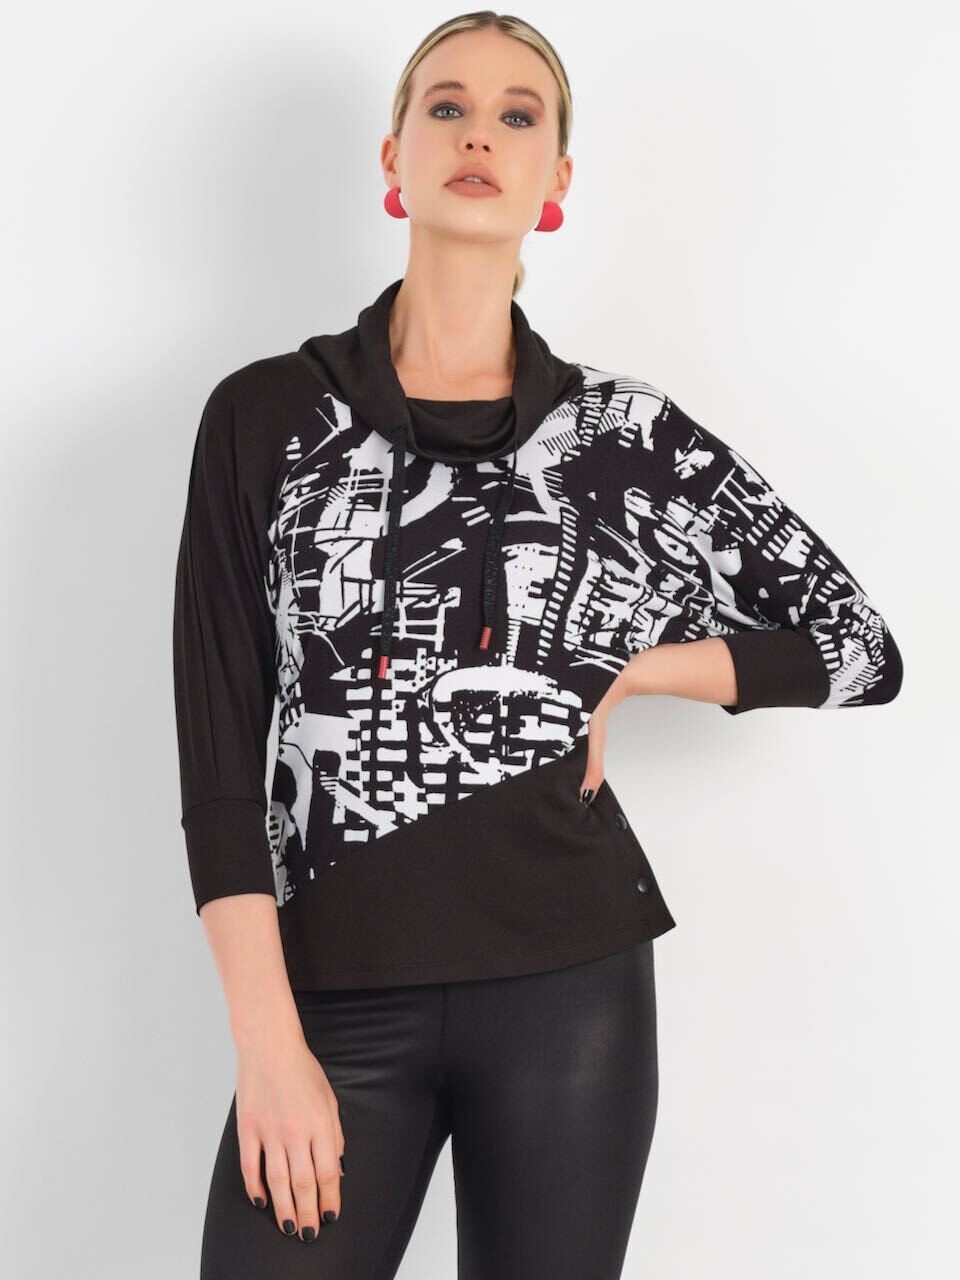 Simply Art Dolcezza: Matiere Urbaine Abstract Art Pullover